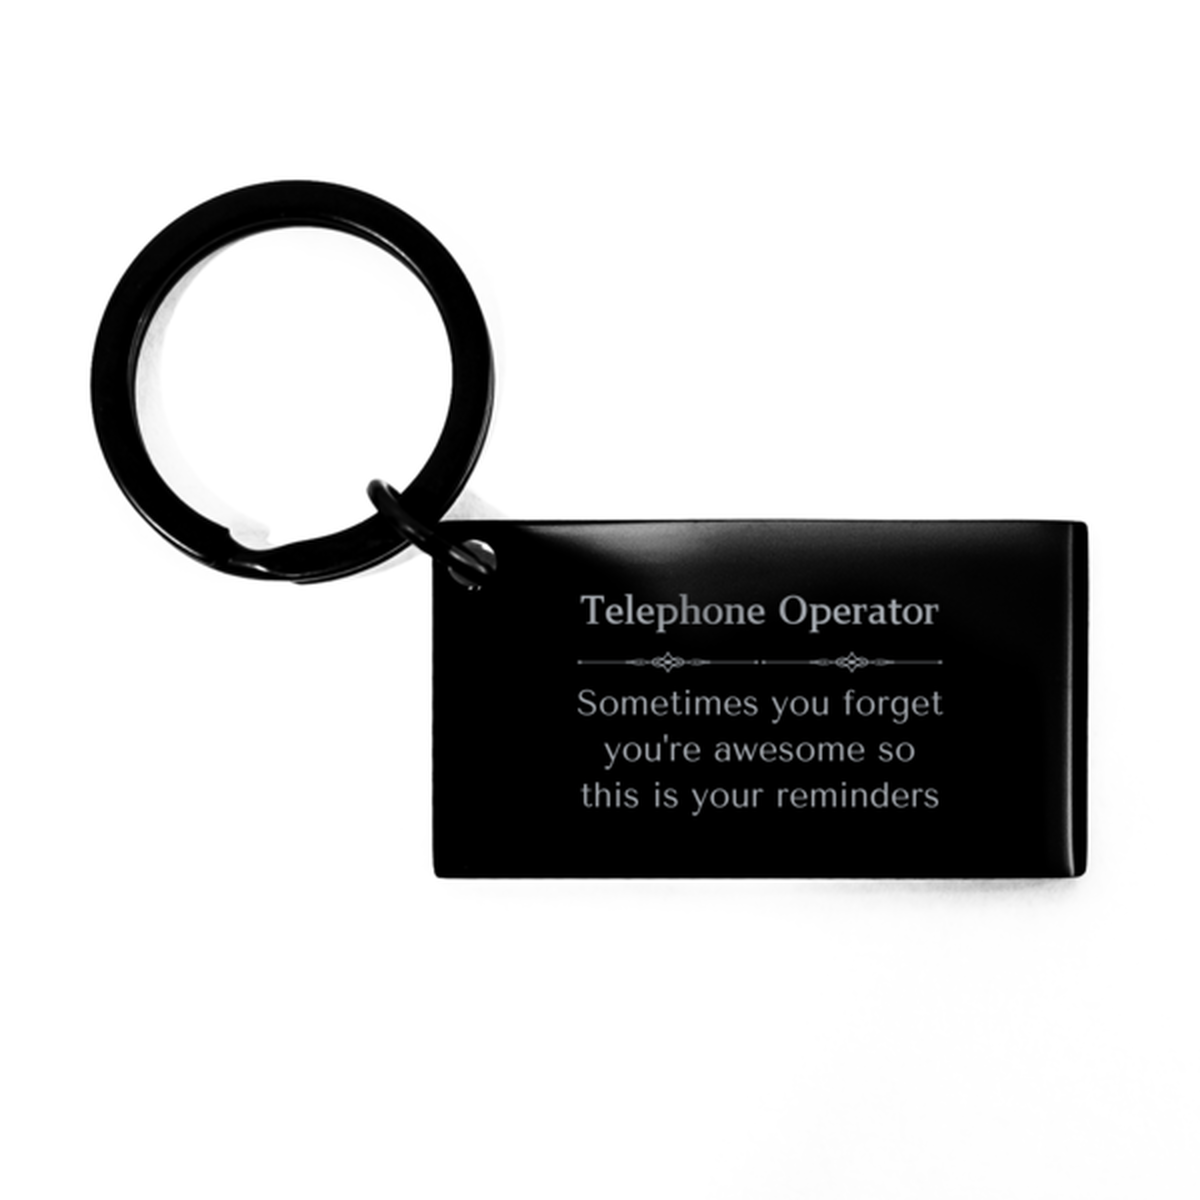 Sentimental Telephone Operator Keychain, X-Ray Technician Sometimes you forget you're awesome so this is your reminders, Graduation Christmas Birthday Gifts for Telephone Operator, Men, Women, Coworkers